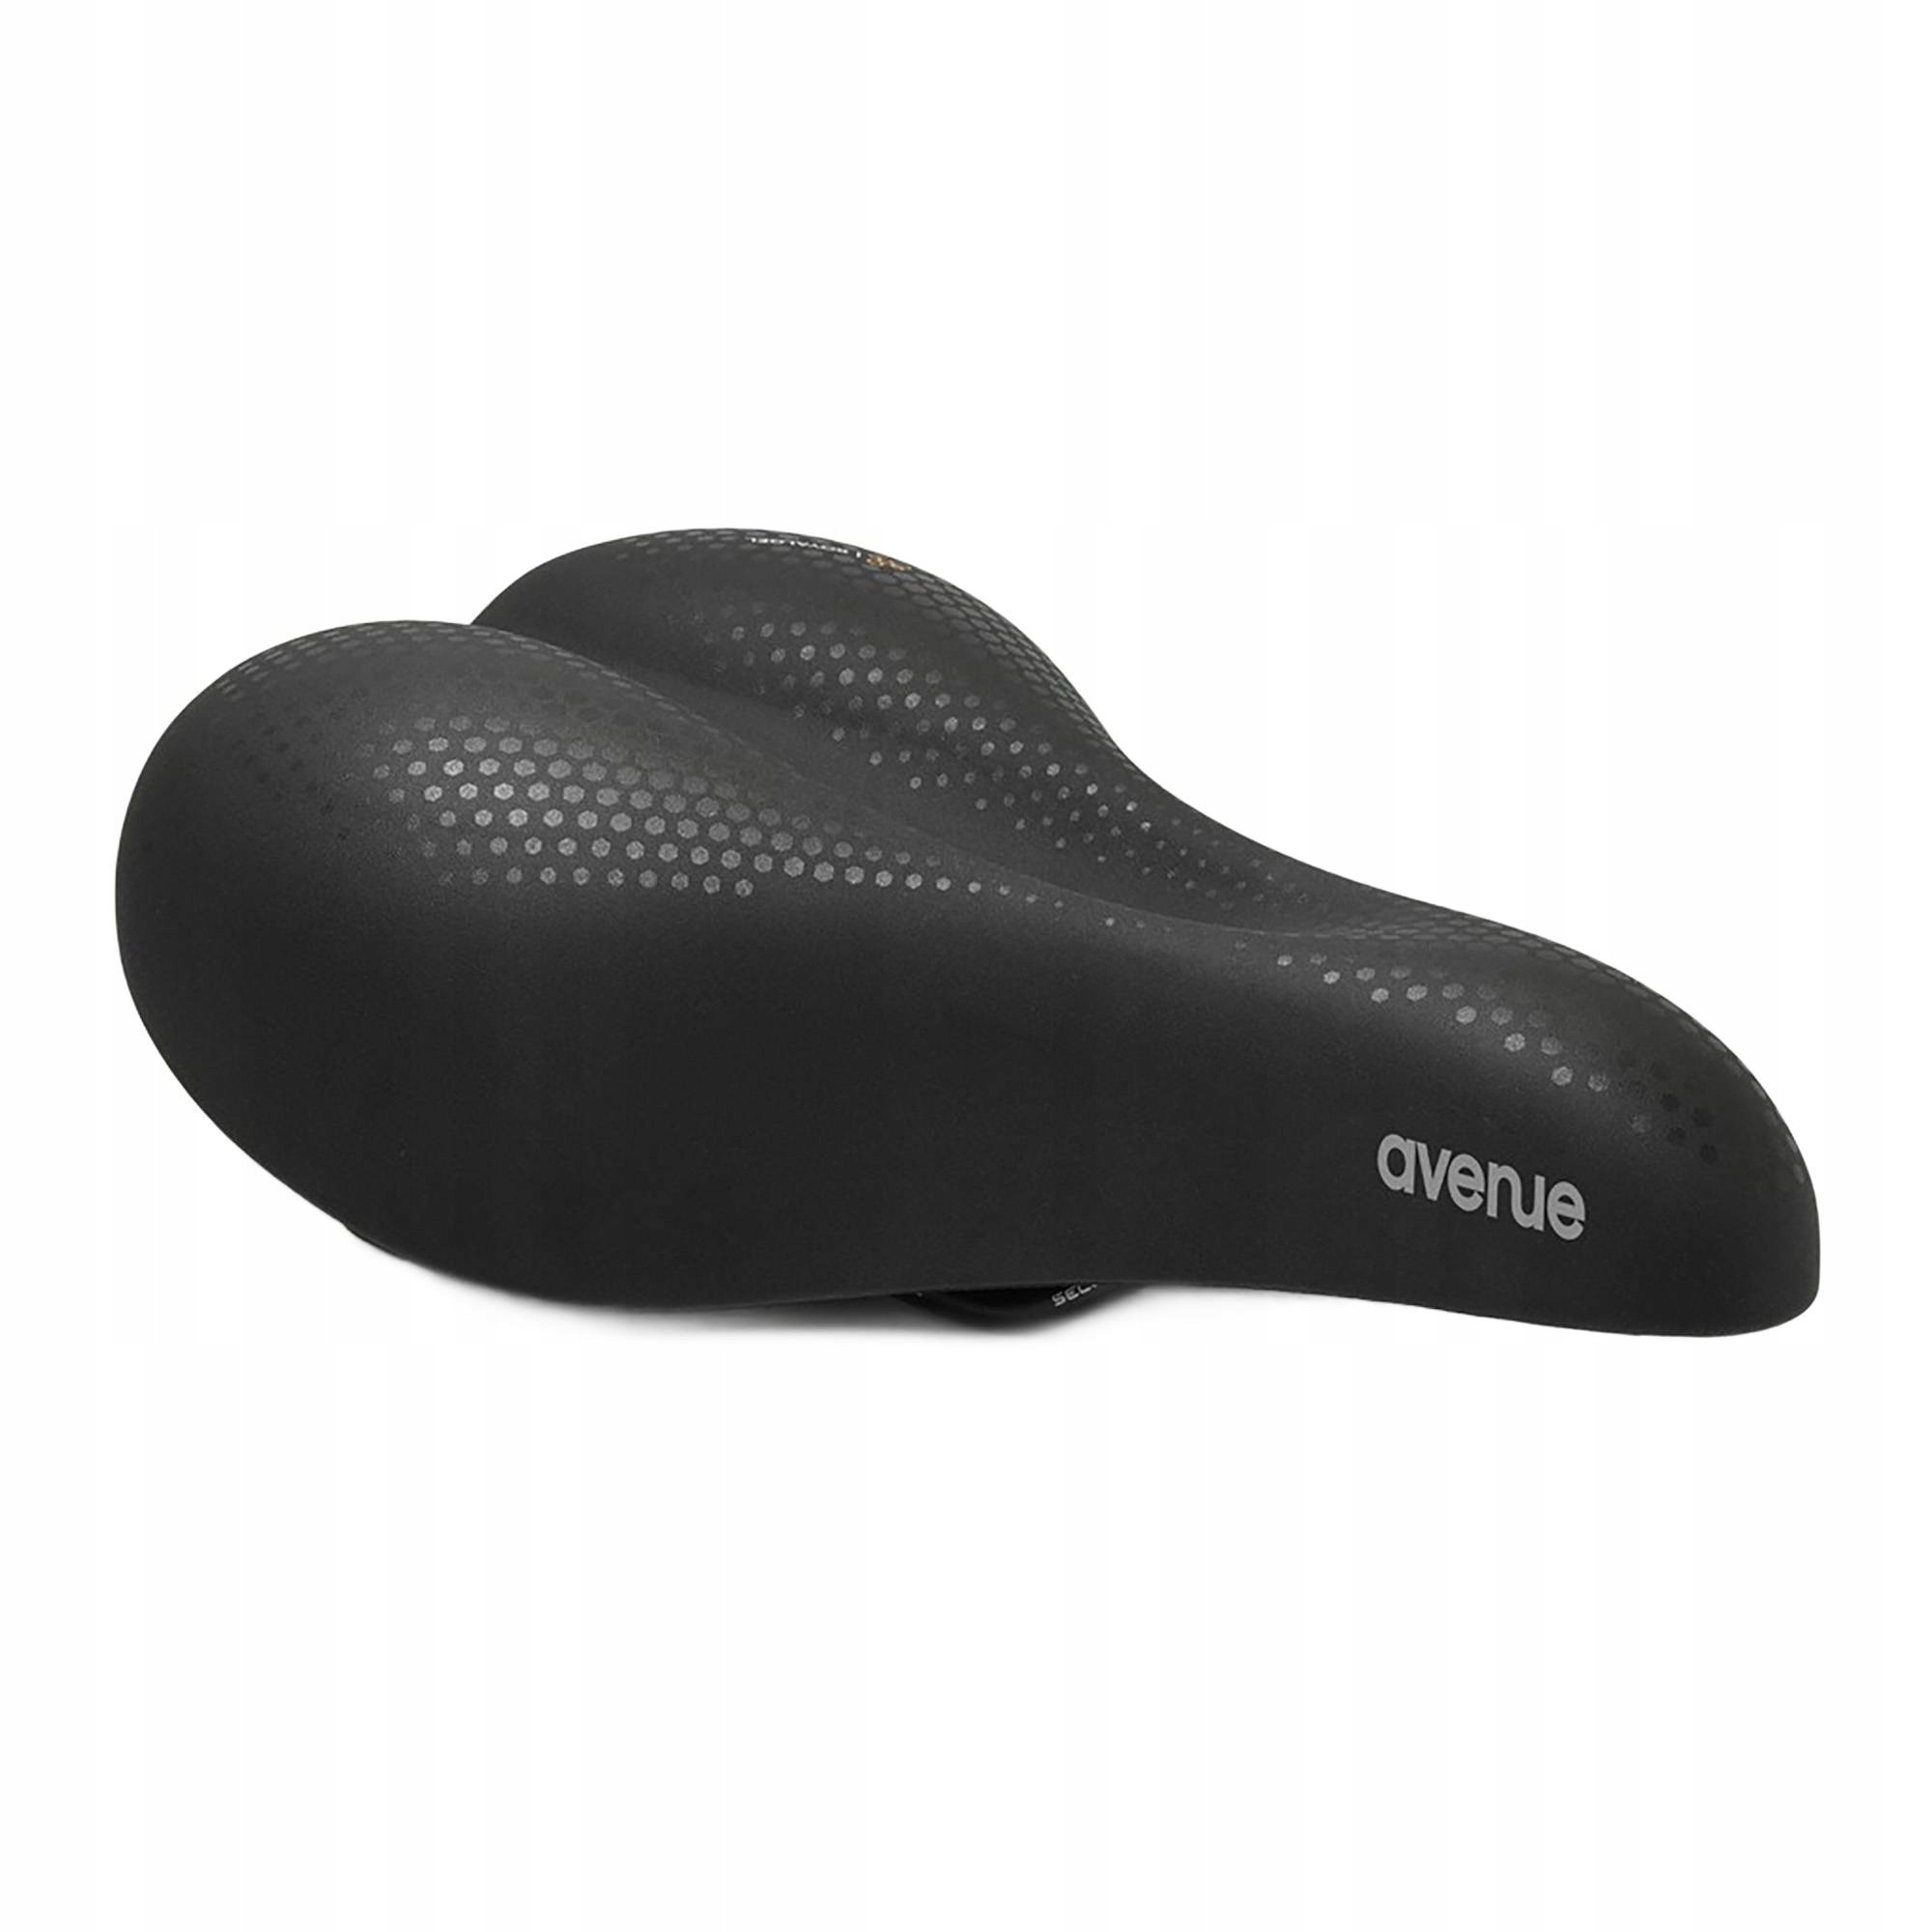 Siodełko rowerowe Selle Royal Classic Moderate 60st. Avenue black